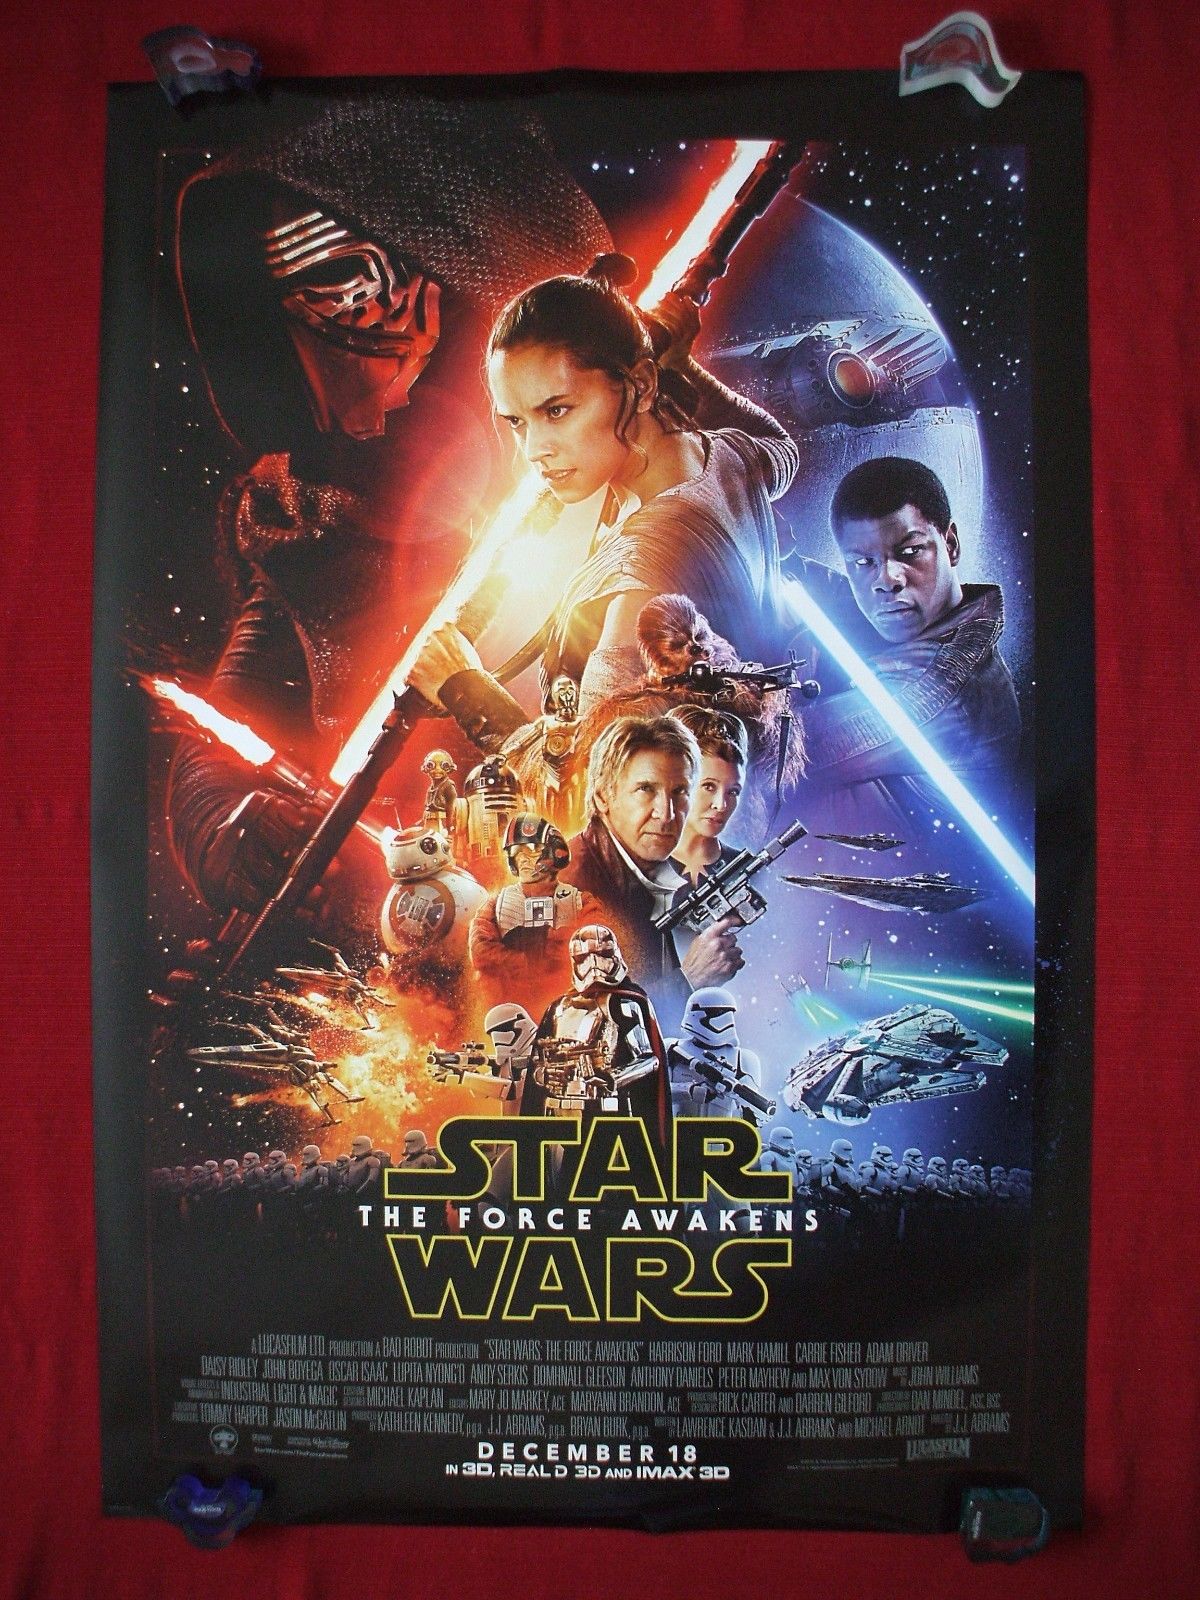 STAR WARS THE FORCE AWAKENS * 2015 ORIGINAL MOVIE POSTER D/S AUTHENTIC ADV. NM-M